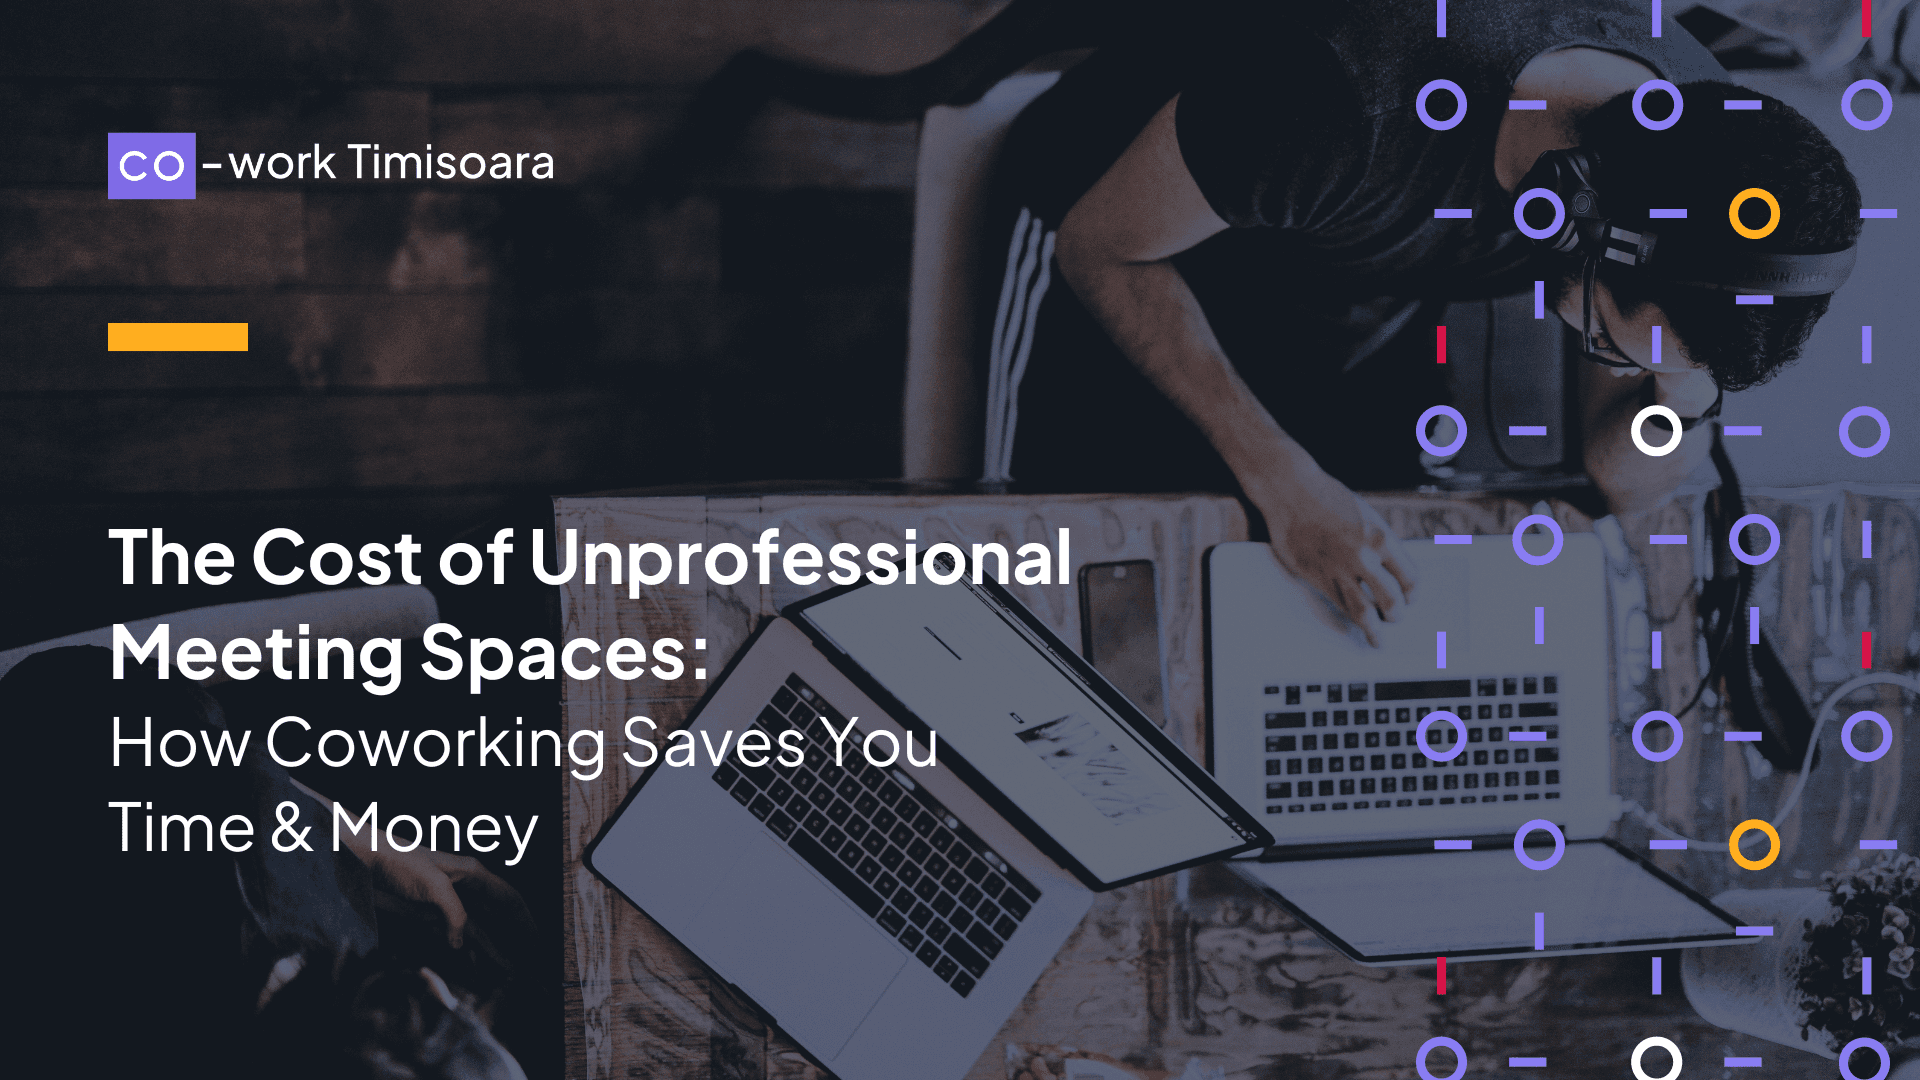 The Cost of Unprofessional Meeting Spaces: How Coworking Saves You Time & Money